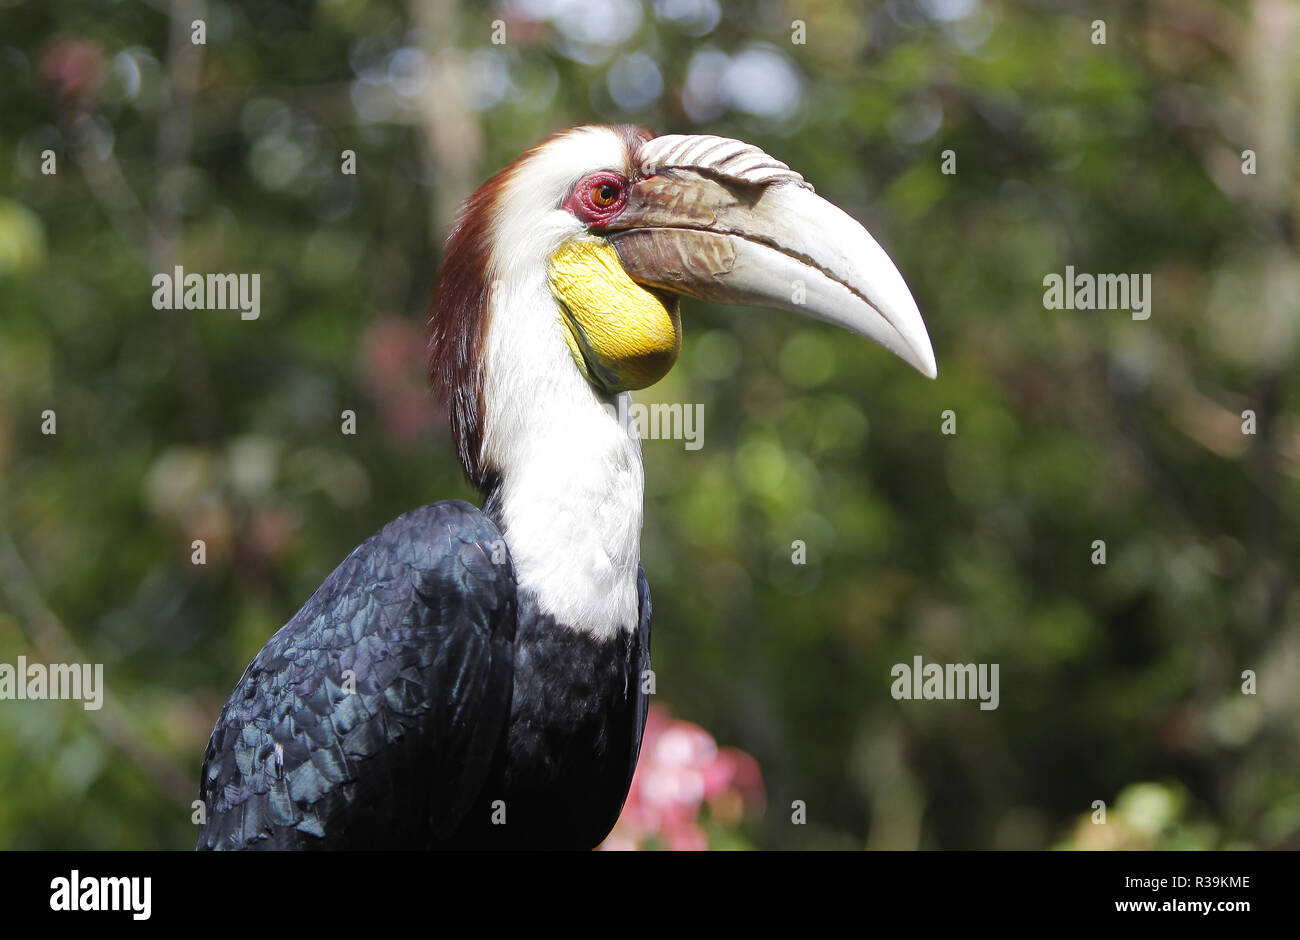 Bogor, West Java, Indonesia. 22nd Nov, 2018. A horn bill (Buceros bicornis) is seen in the Taman Safari Zoo.Safari park zoo (Taman Safari) Indonesia has a large collection of wild and rare animals. Credit: Adriana Adinandra/SOPA Images/ZUMA Wire/Alamy Live News Stock Photo